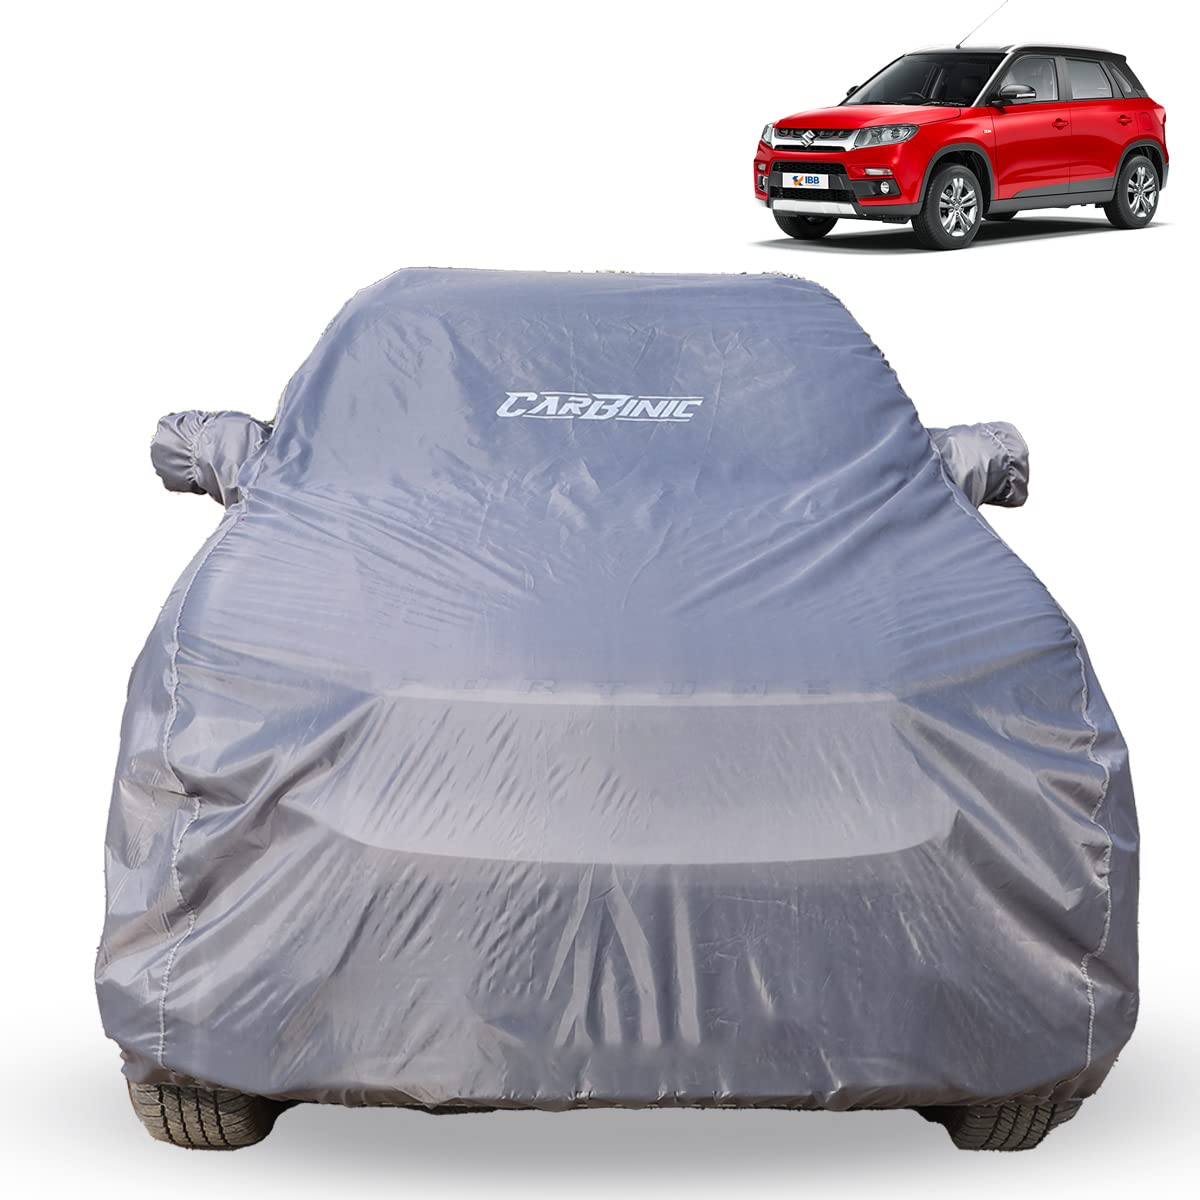 CARBINIC Car Body Cover for Maruti Brezza 2022 | Water Resistant, UV Protection Car Cover | Scratchproof Body Shield | Dustproof All-Weather Cover | Mirror Pocket & Antenna | Car Accessories, Grey